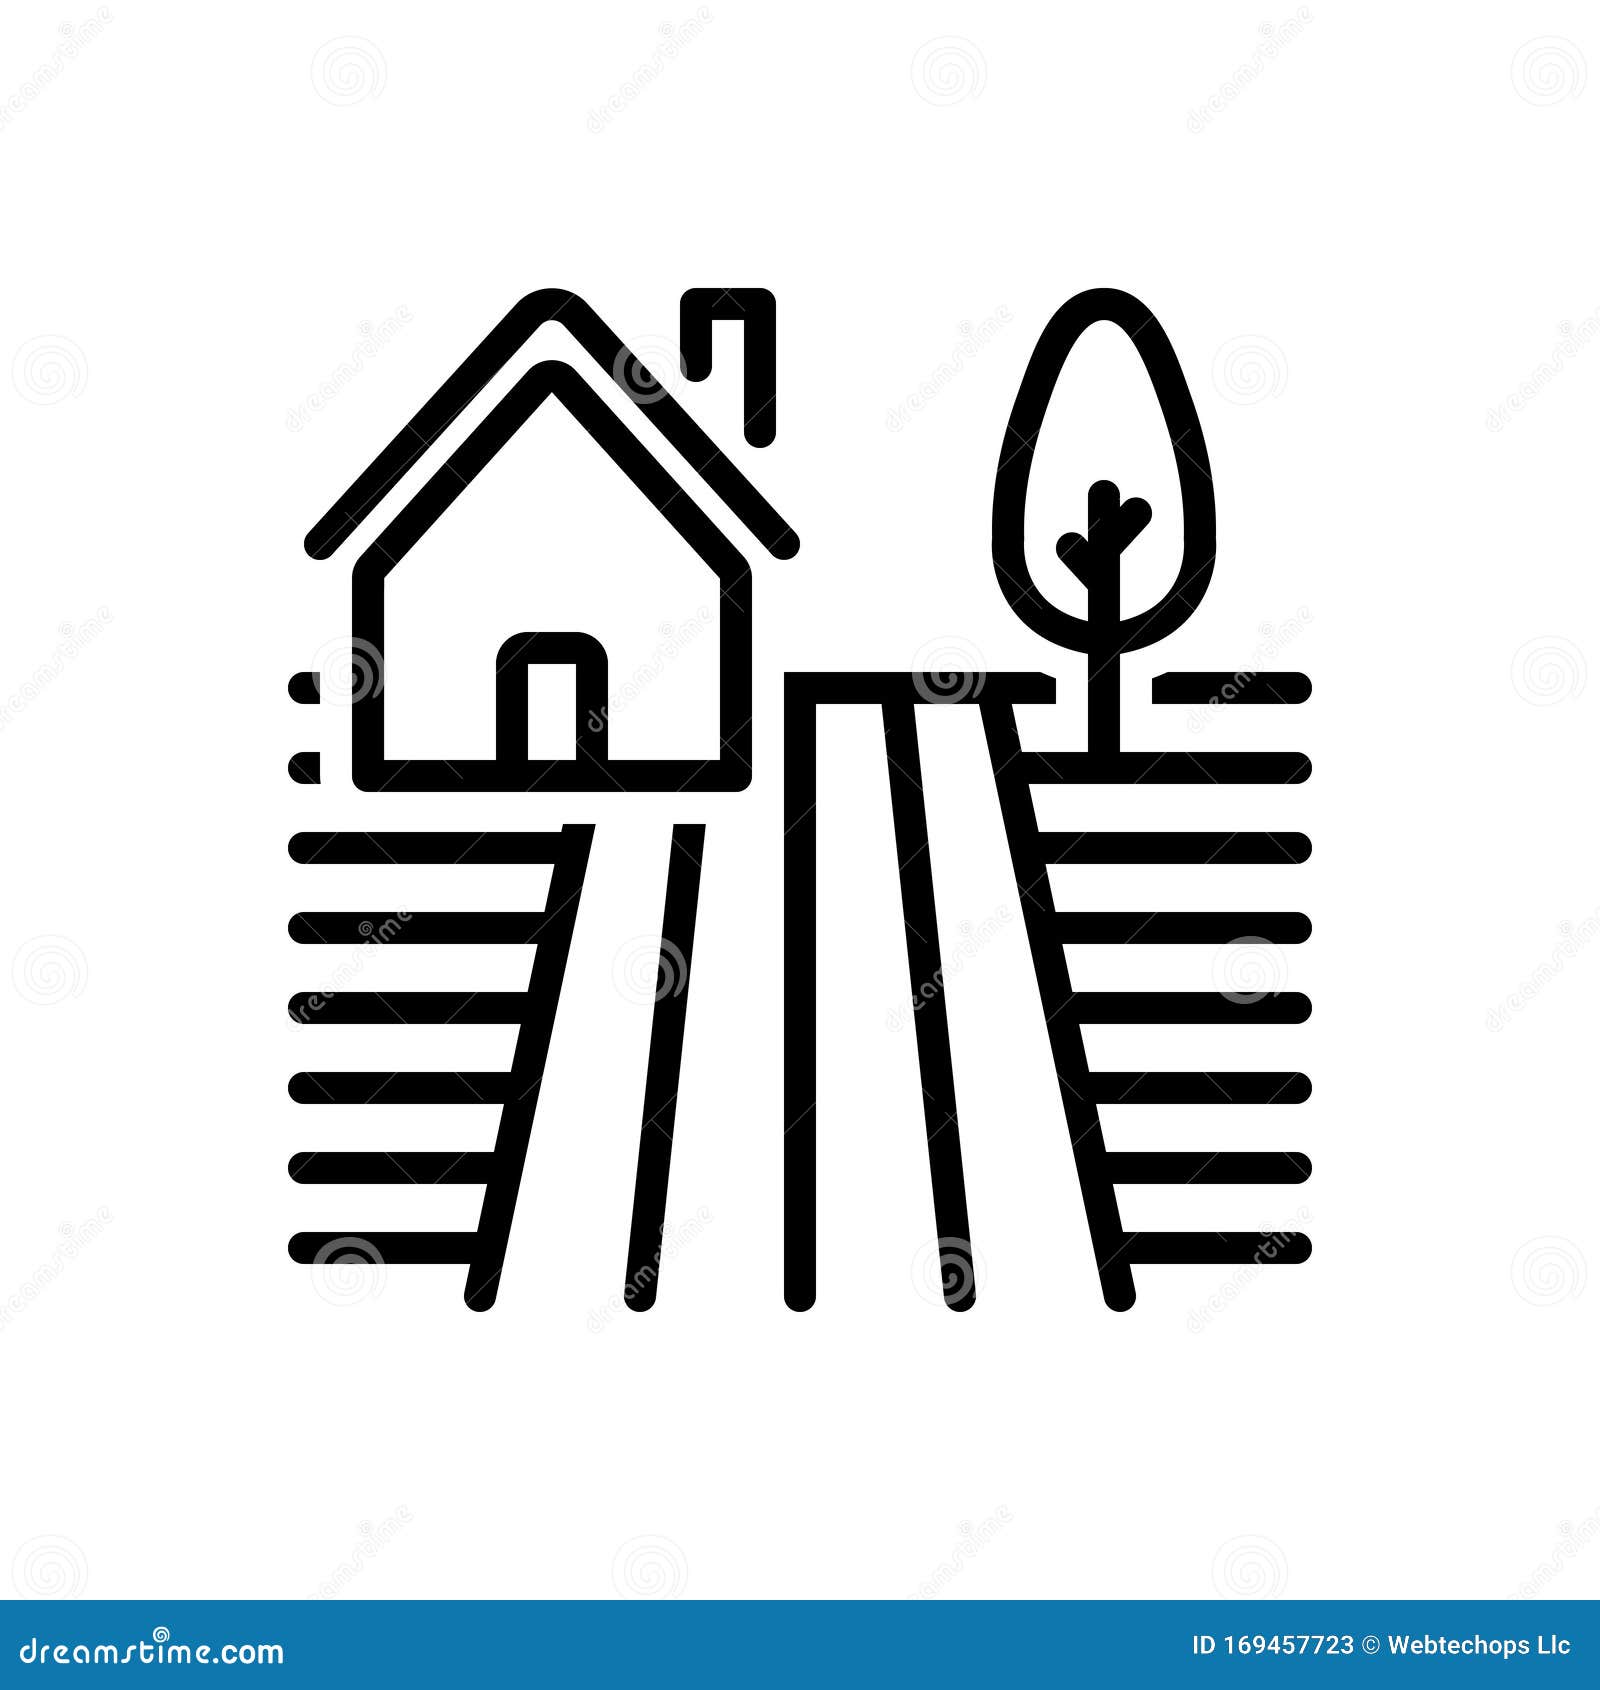 Black Line Icon For Farm Land And Ground Stock Vector Illustration